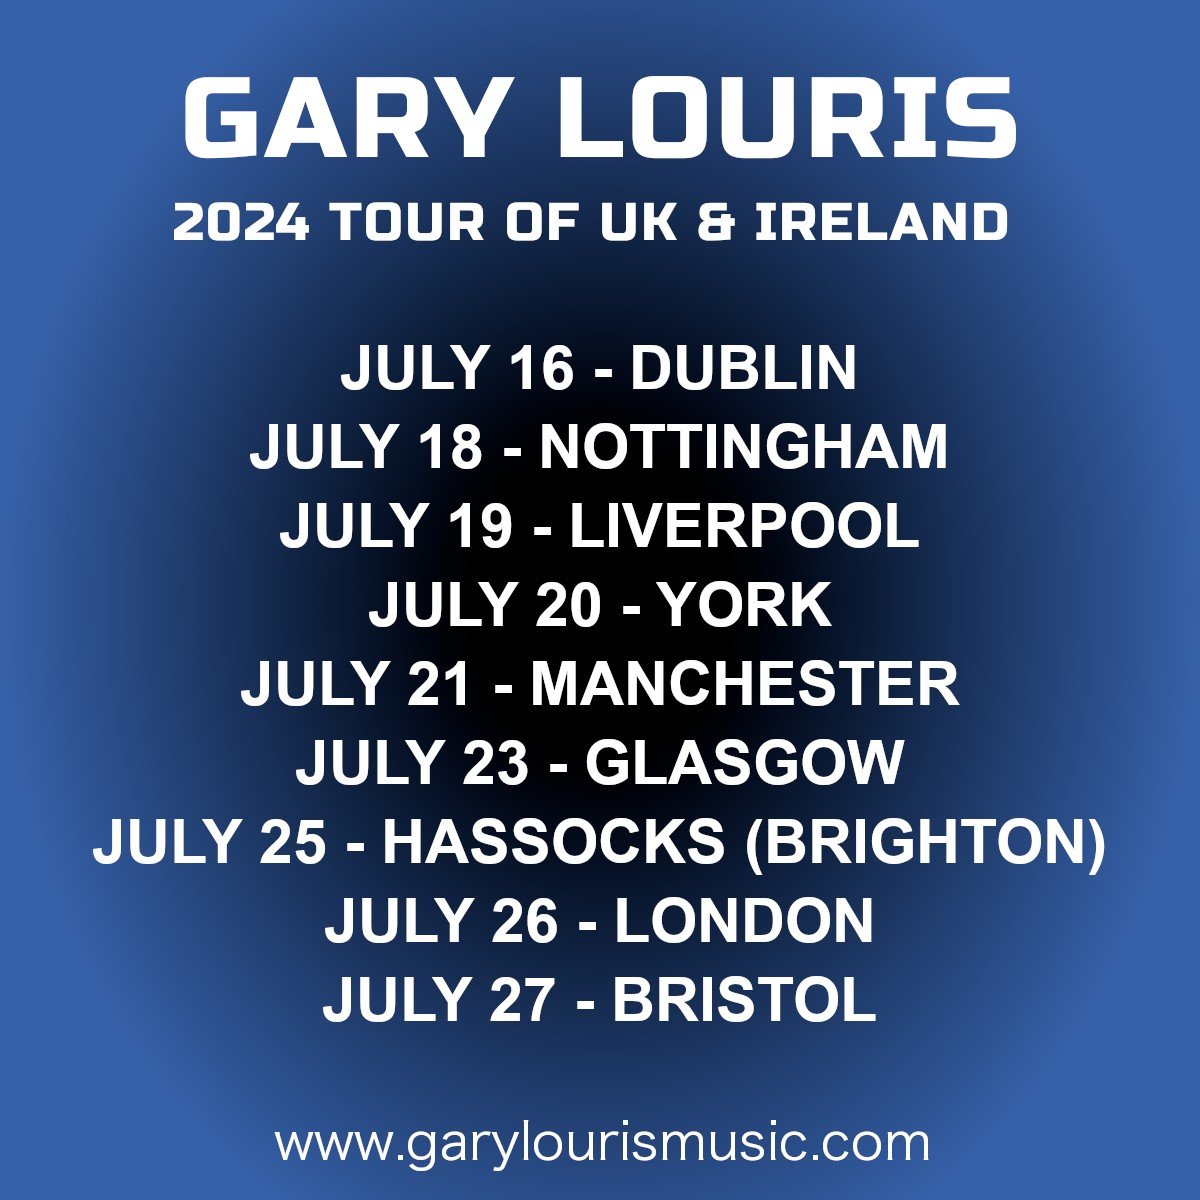 LAST MINUTE TOUR ADDITION

A Liverpool date on July 19 has just been added to the upcoming Gary Louris solo tour of the UK and Ireland this summer. 
 
JULY 16 - Dublin, Ireland - Whelan&rsquo;s
JULY 18 - Nottingham, England - Bodega 
JULY 19 - Liverp